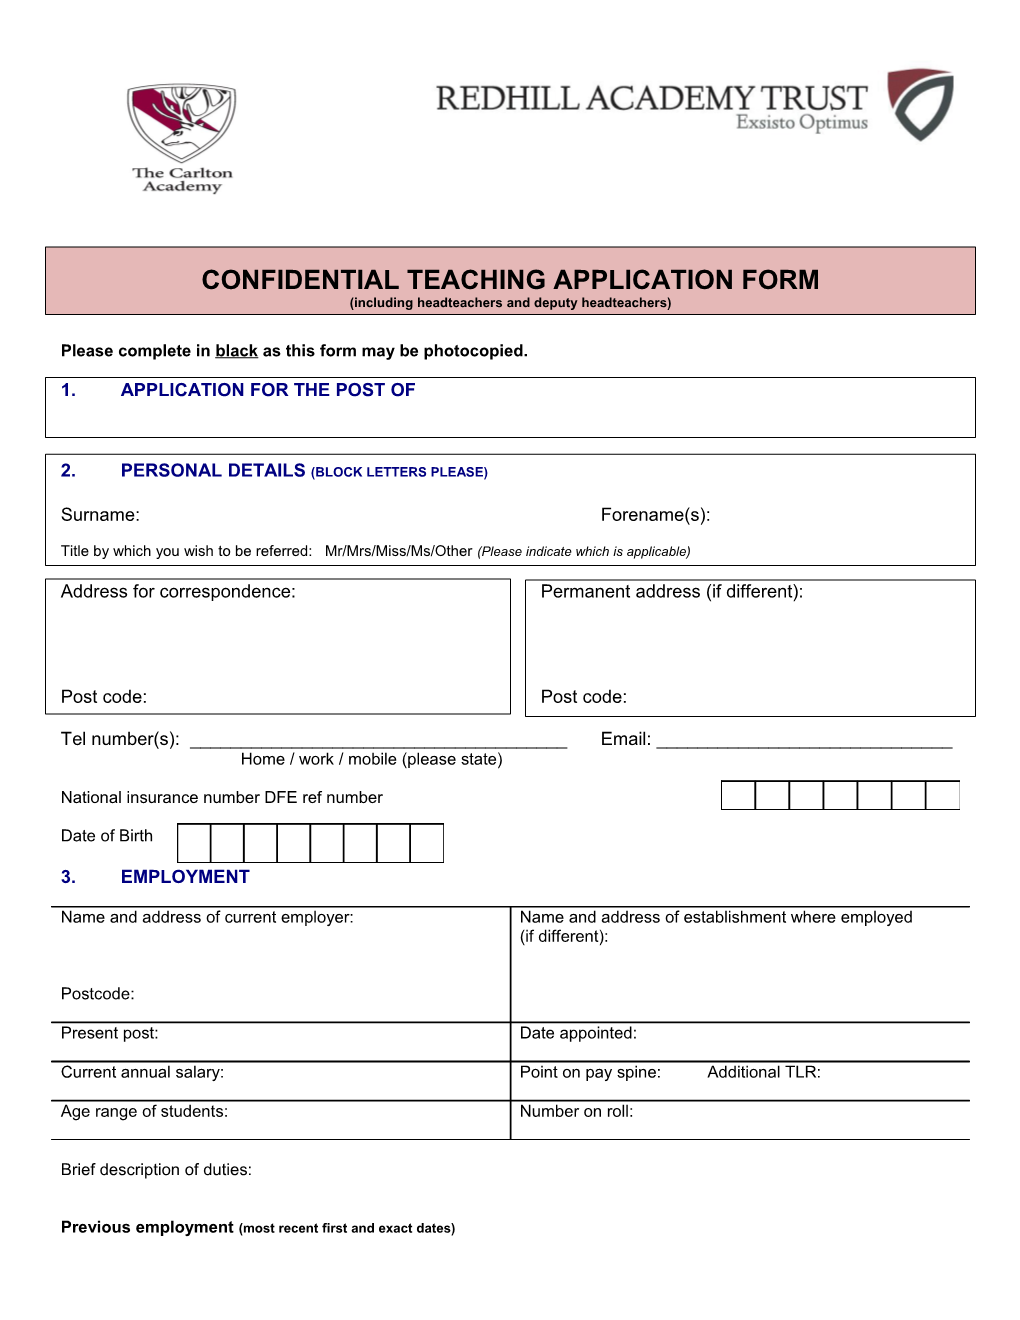 Confidential Teaching Application Form